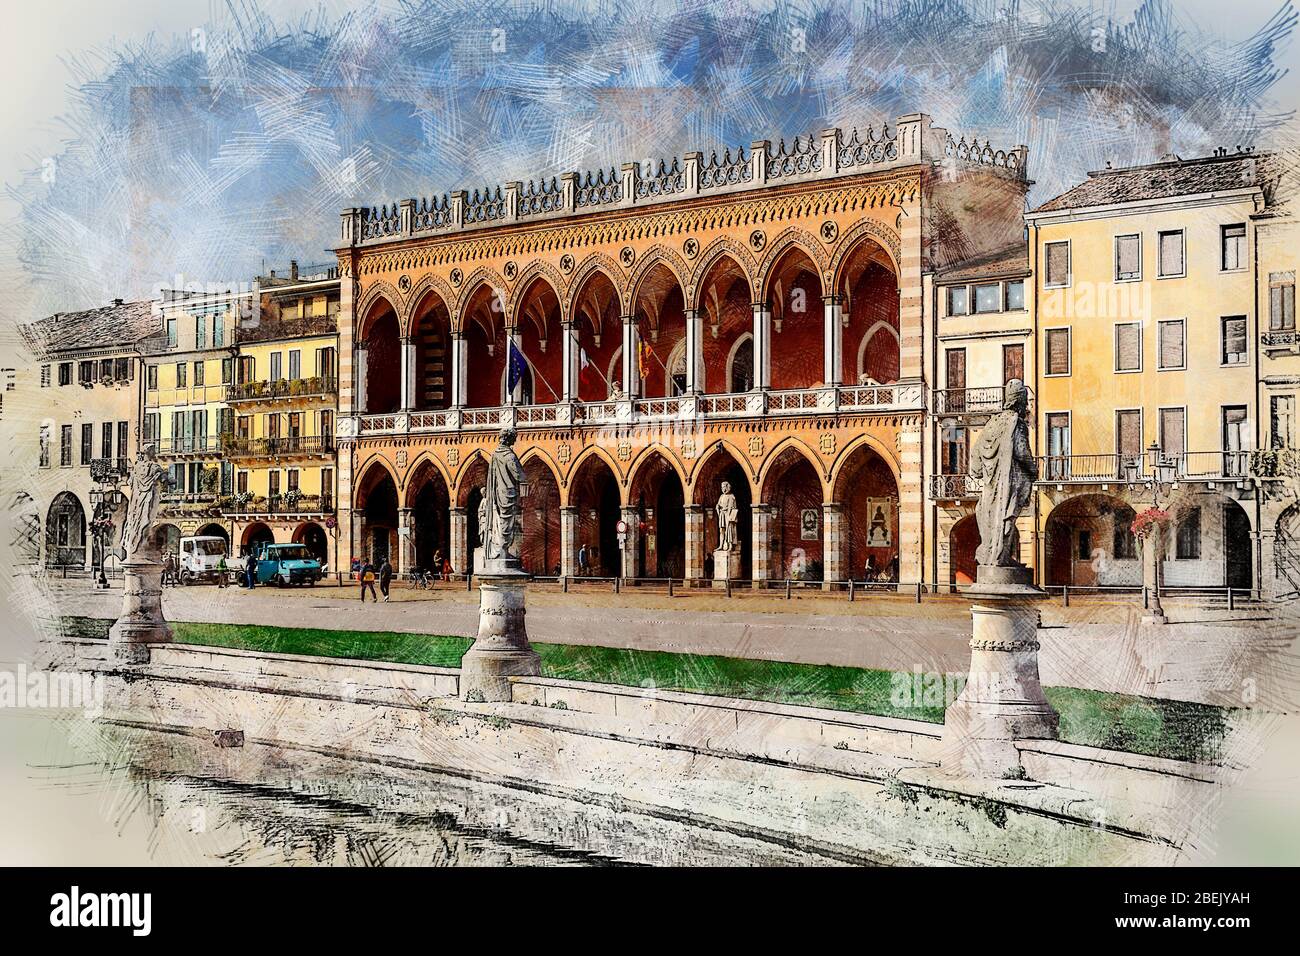 Lodge Amulea and and sculptures at Prato Della Valle. Padua, Province of Padua/ Italy. Color pencil style illustration. Stock Photo